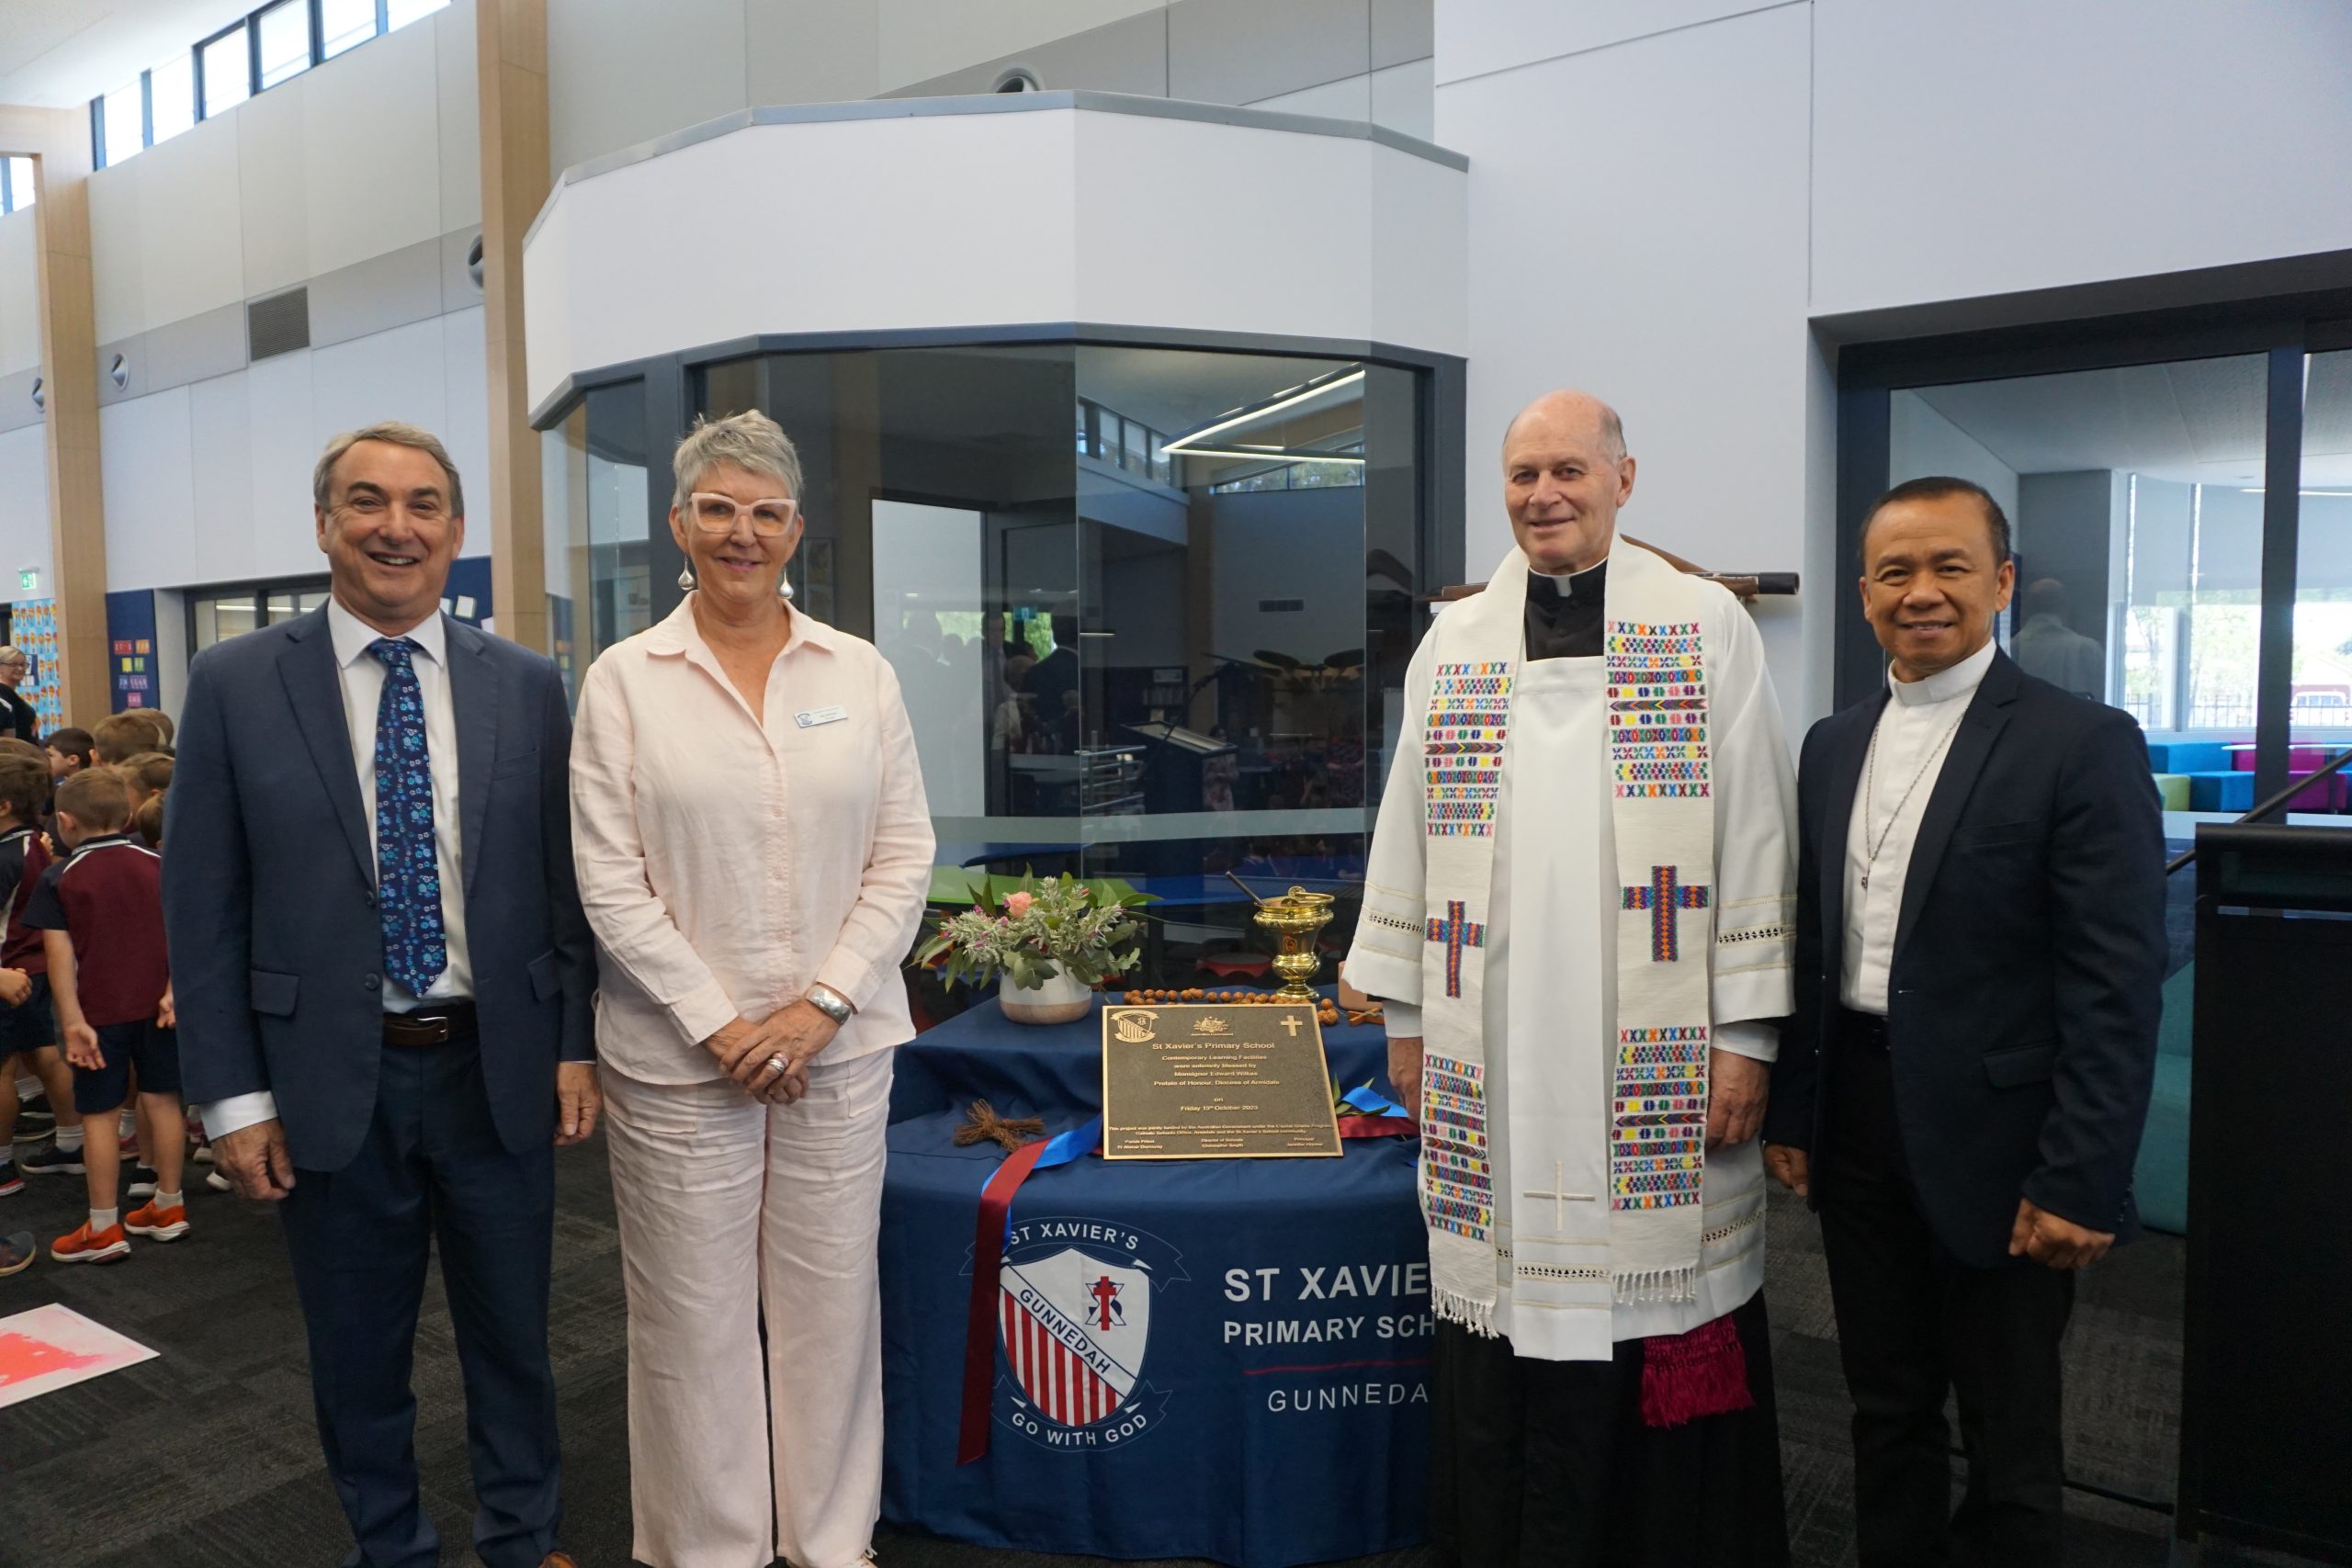 Opening of new learning facilities for St Xavier’s